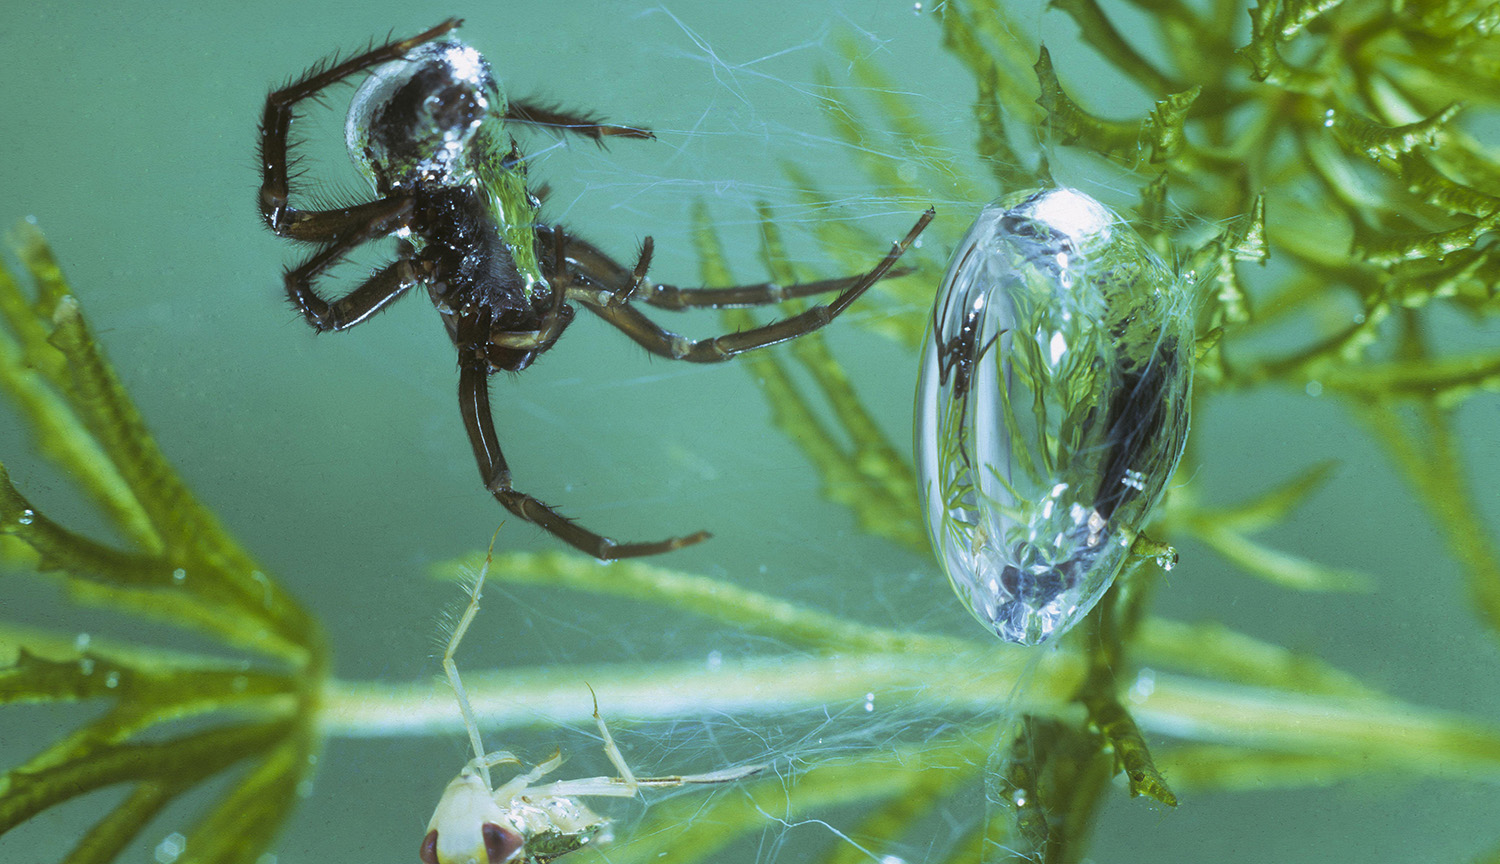 An underwater spider approaches a bubble.